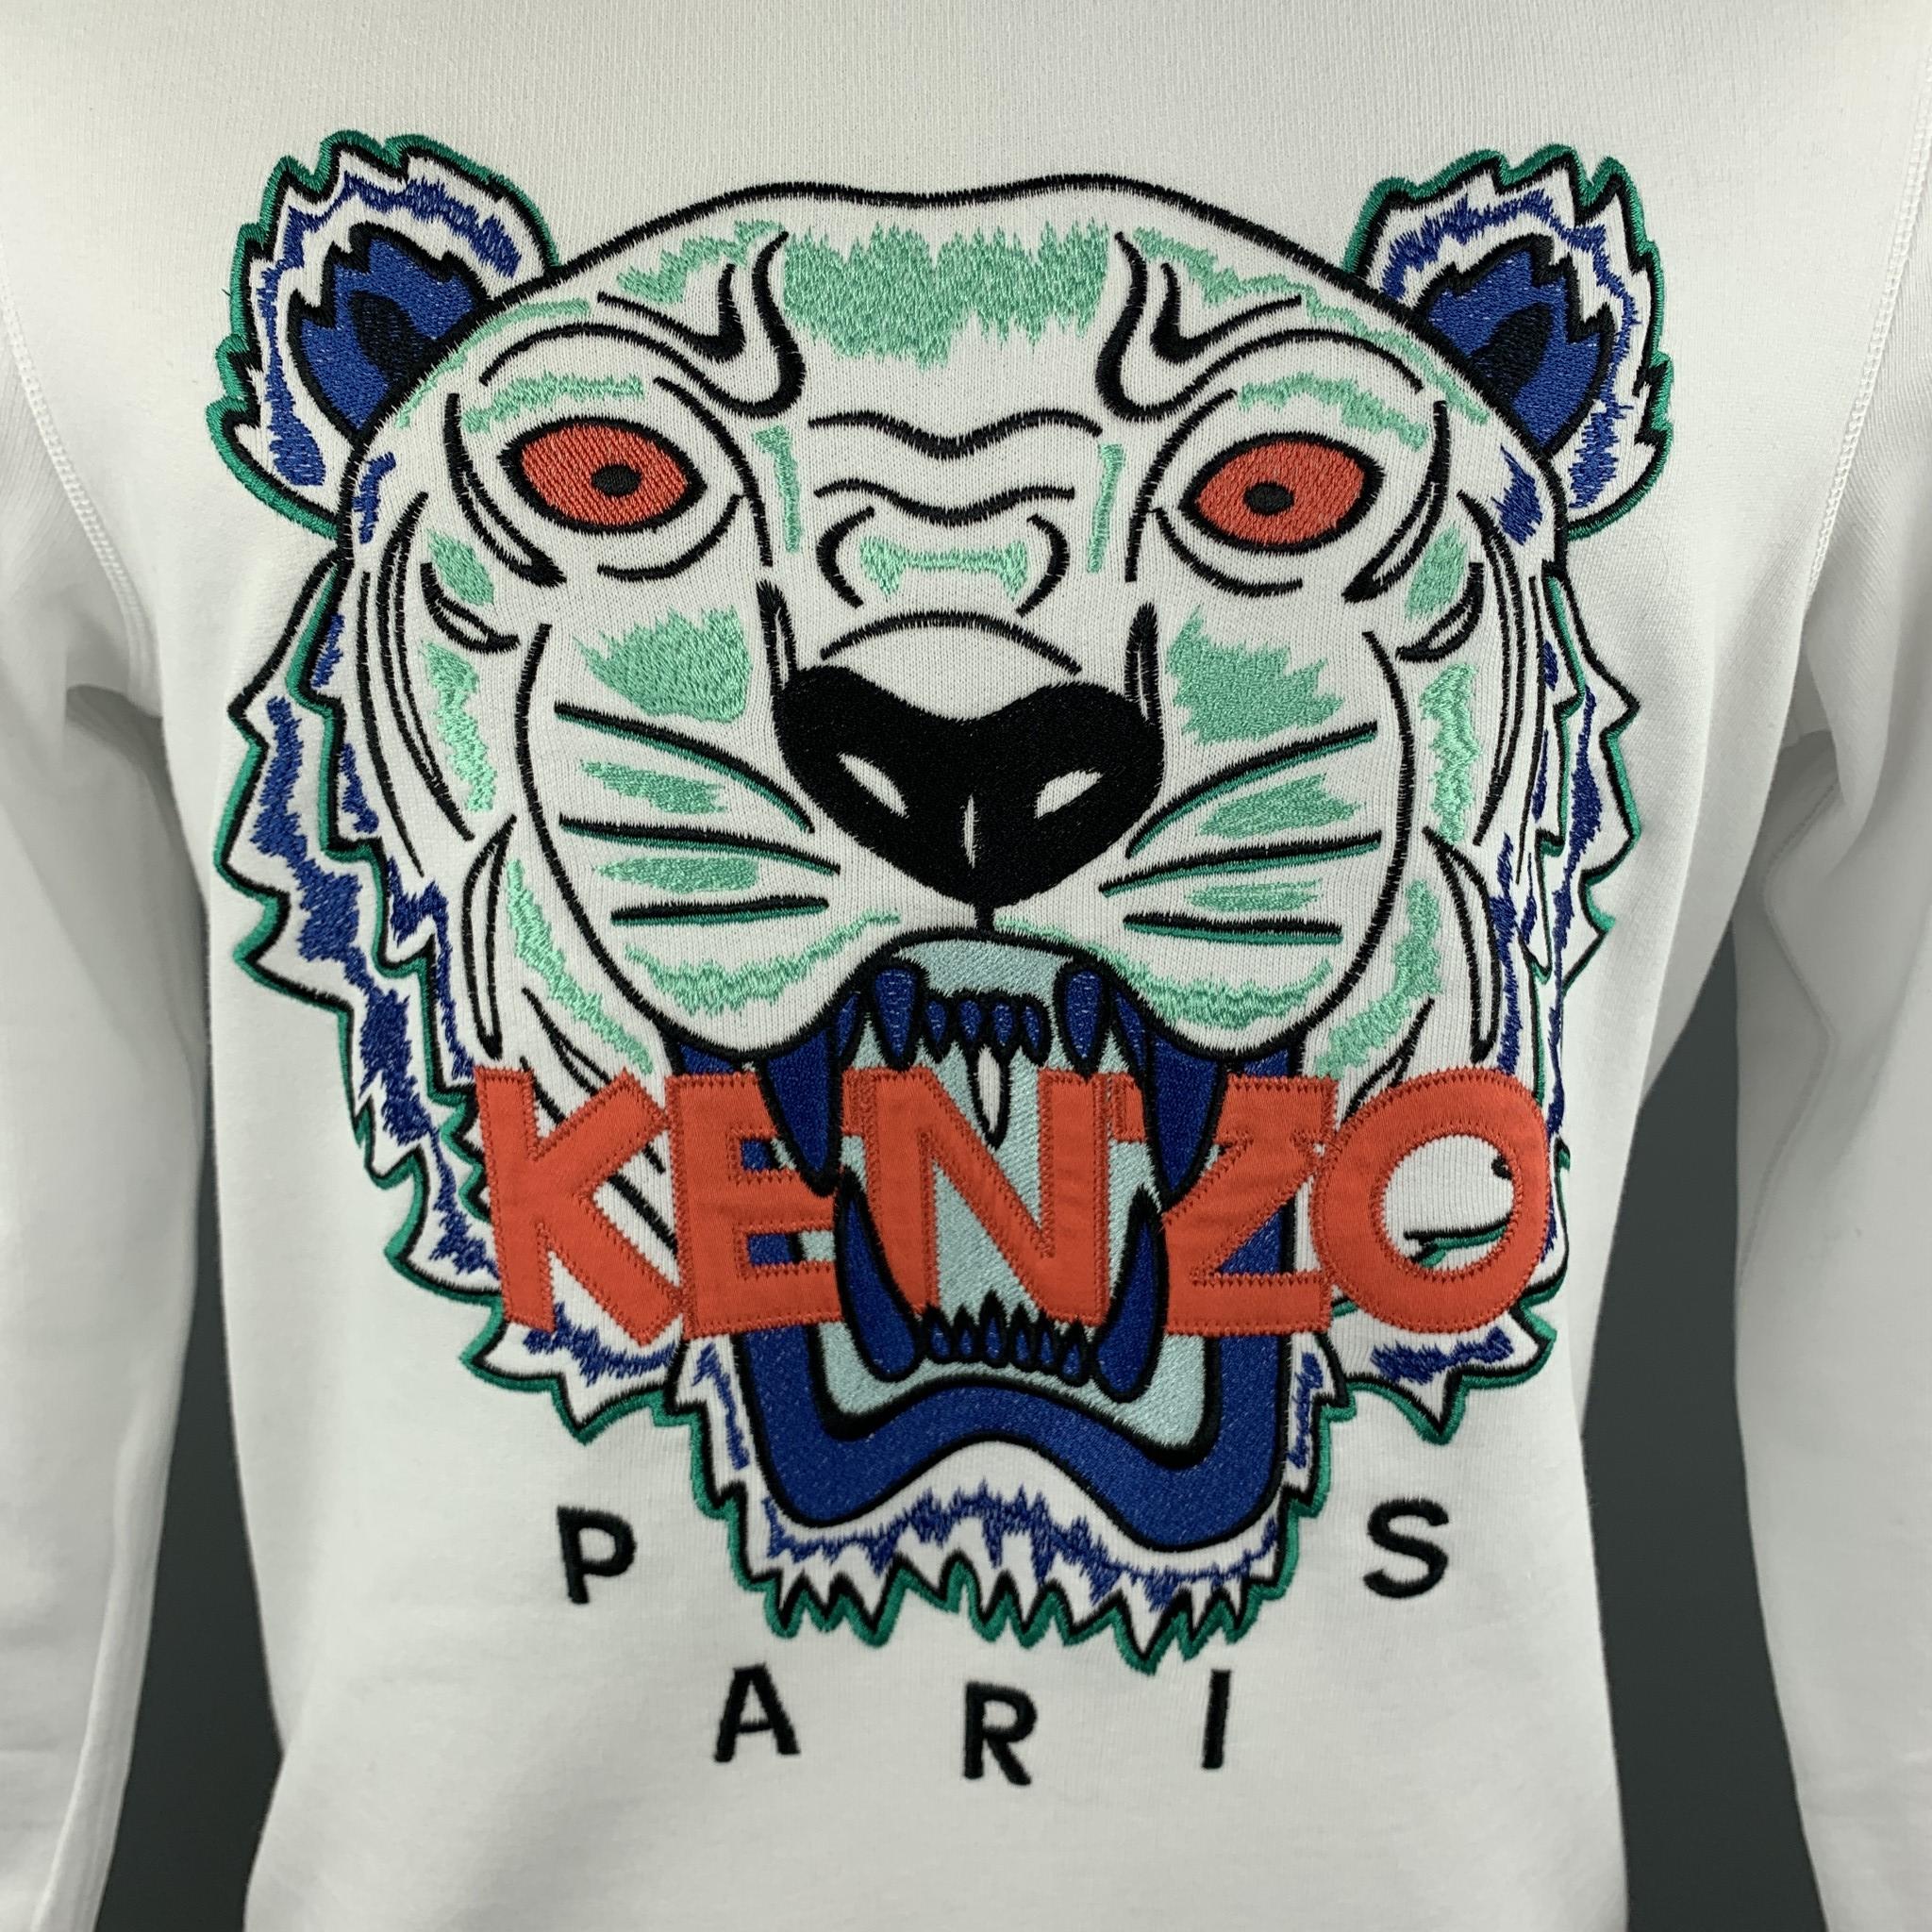 KENZO pullover sweater comes in white jersey knit with a crewneck and iconic ikat tiger logo embroidery graphic in a blue and orange colorway. Made in portugal. 

New with Tags.
Marked: M

Measurements:

Shoulder: 17 in.
Chest: 40 in.
Sleeve: 27